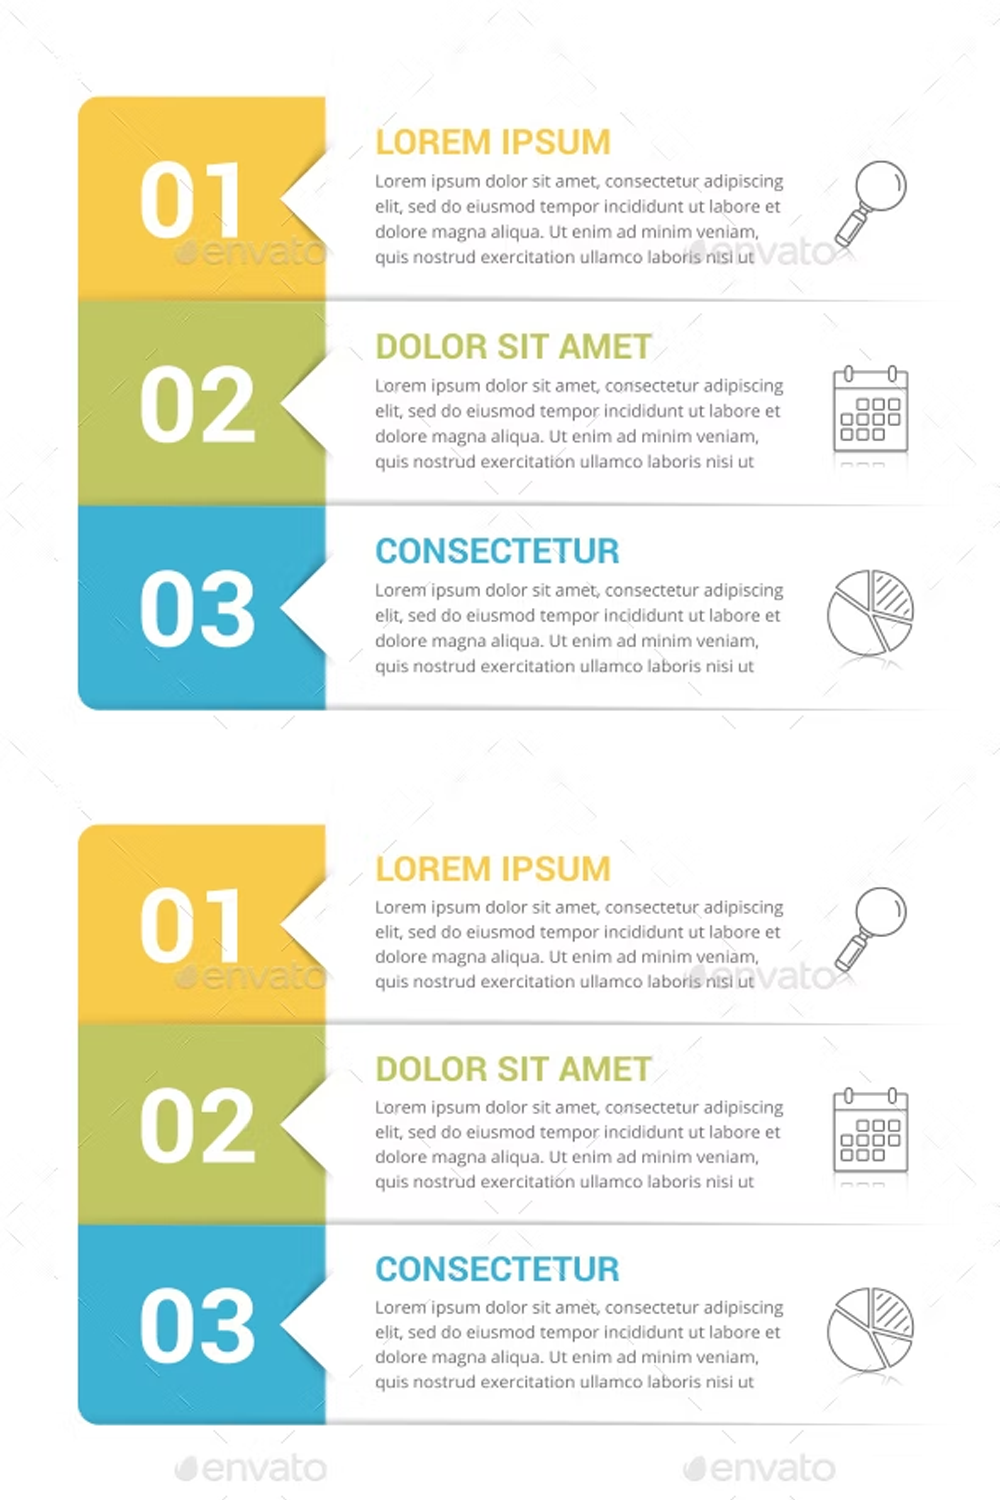 Illustrations infographic template with 3 steps of pinterest.